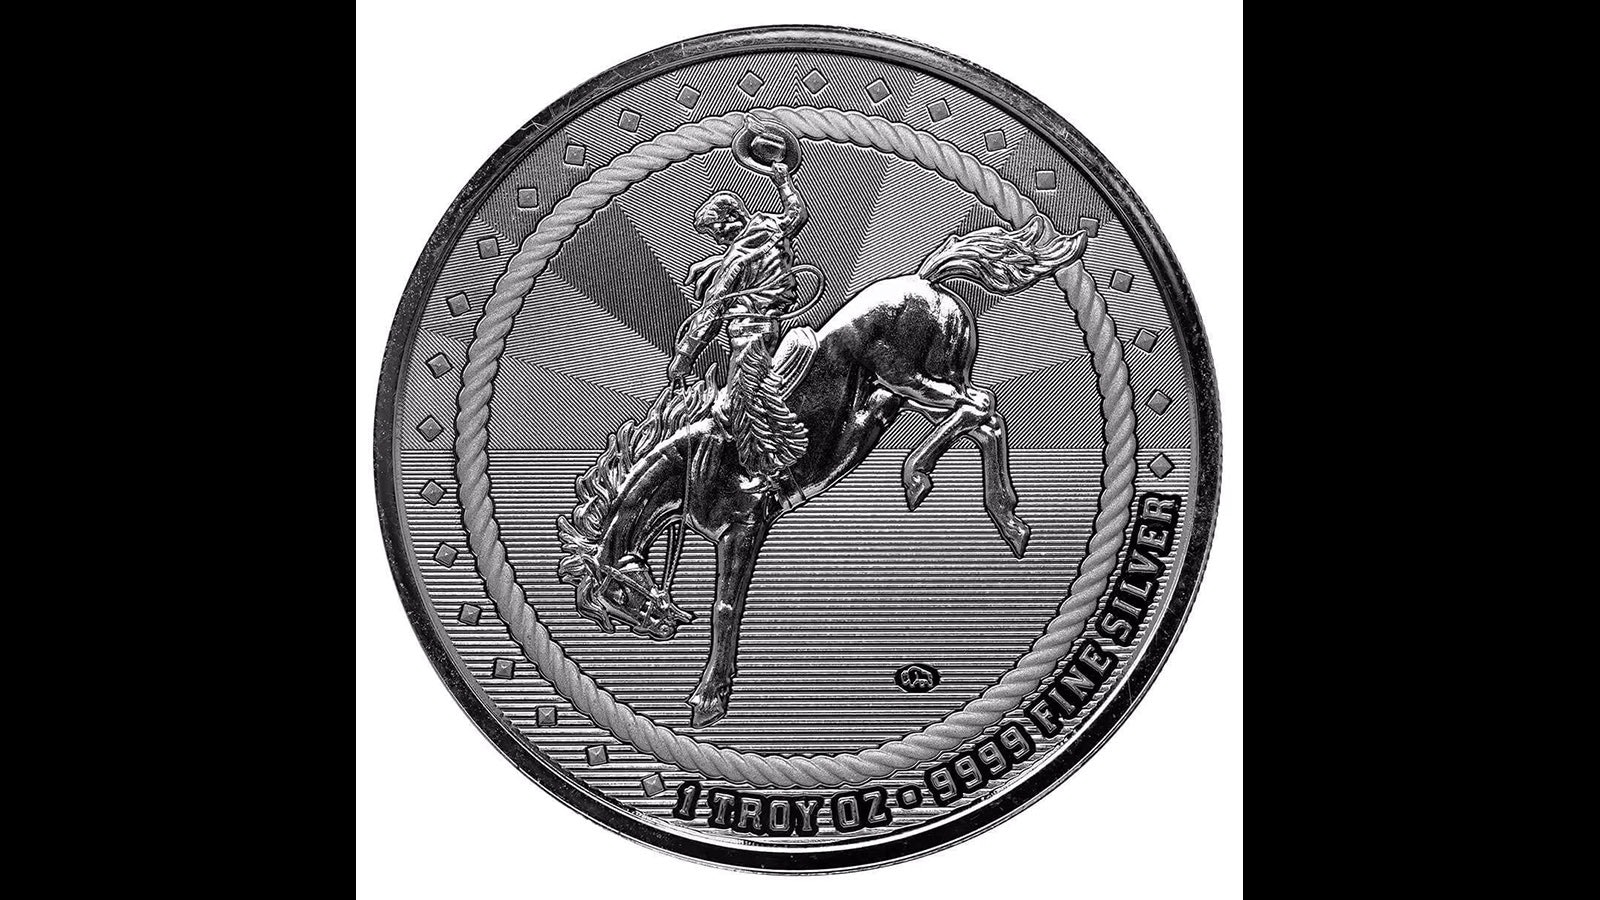 The Scottsdale Mint’s cowboy round is a hot seller in recent months and is a salute to both Wyoming and Scottsdale, Arizona.